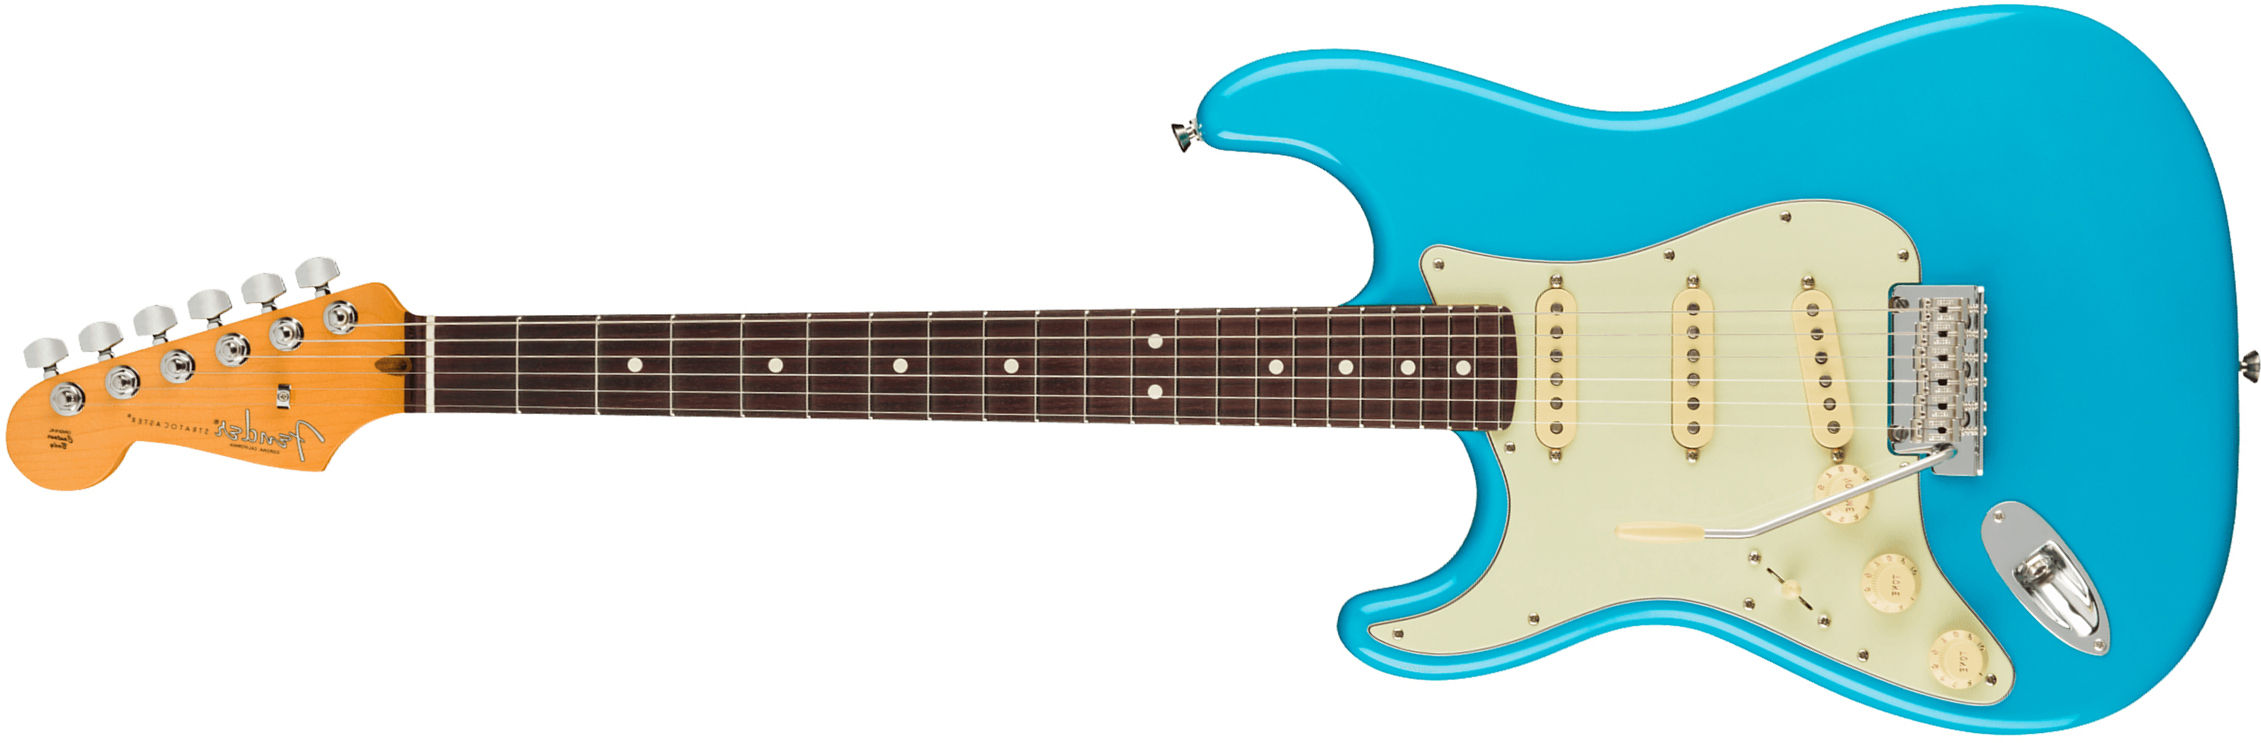 Fender Strat American Professional Ii Lh Gaucher Usa Rw - Miami Blue - Left-handed electric guitar - Main picture